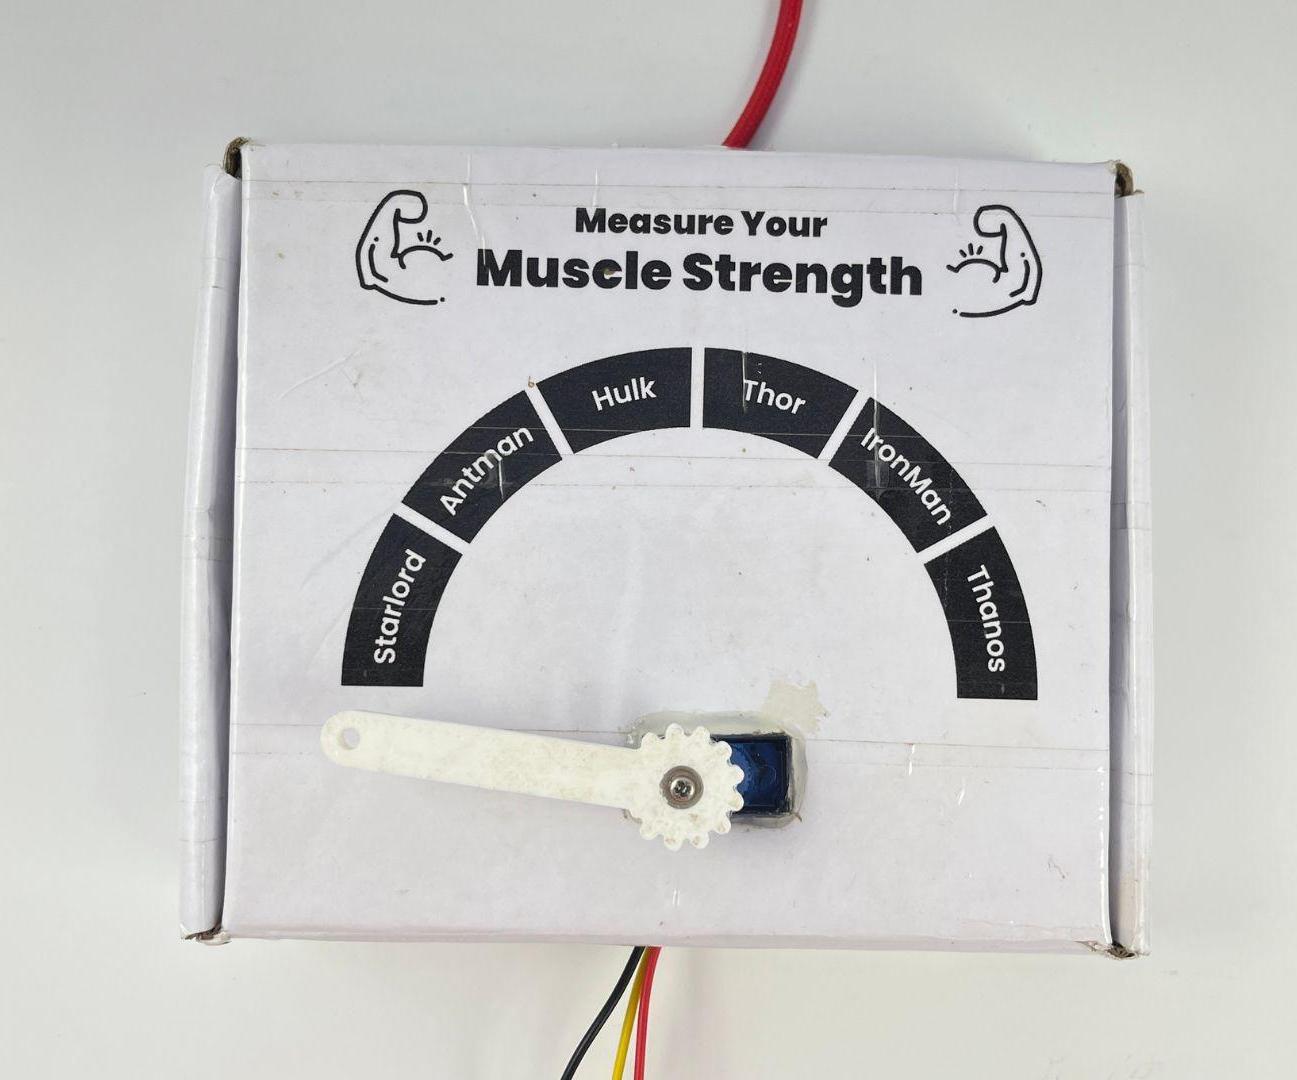 Making a Muscle Strength Game Using Muscle BioAmp Shield & Arduino Uno